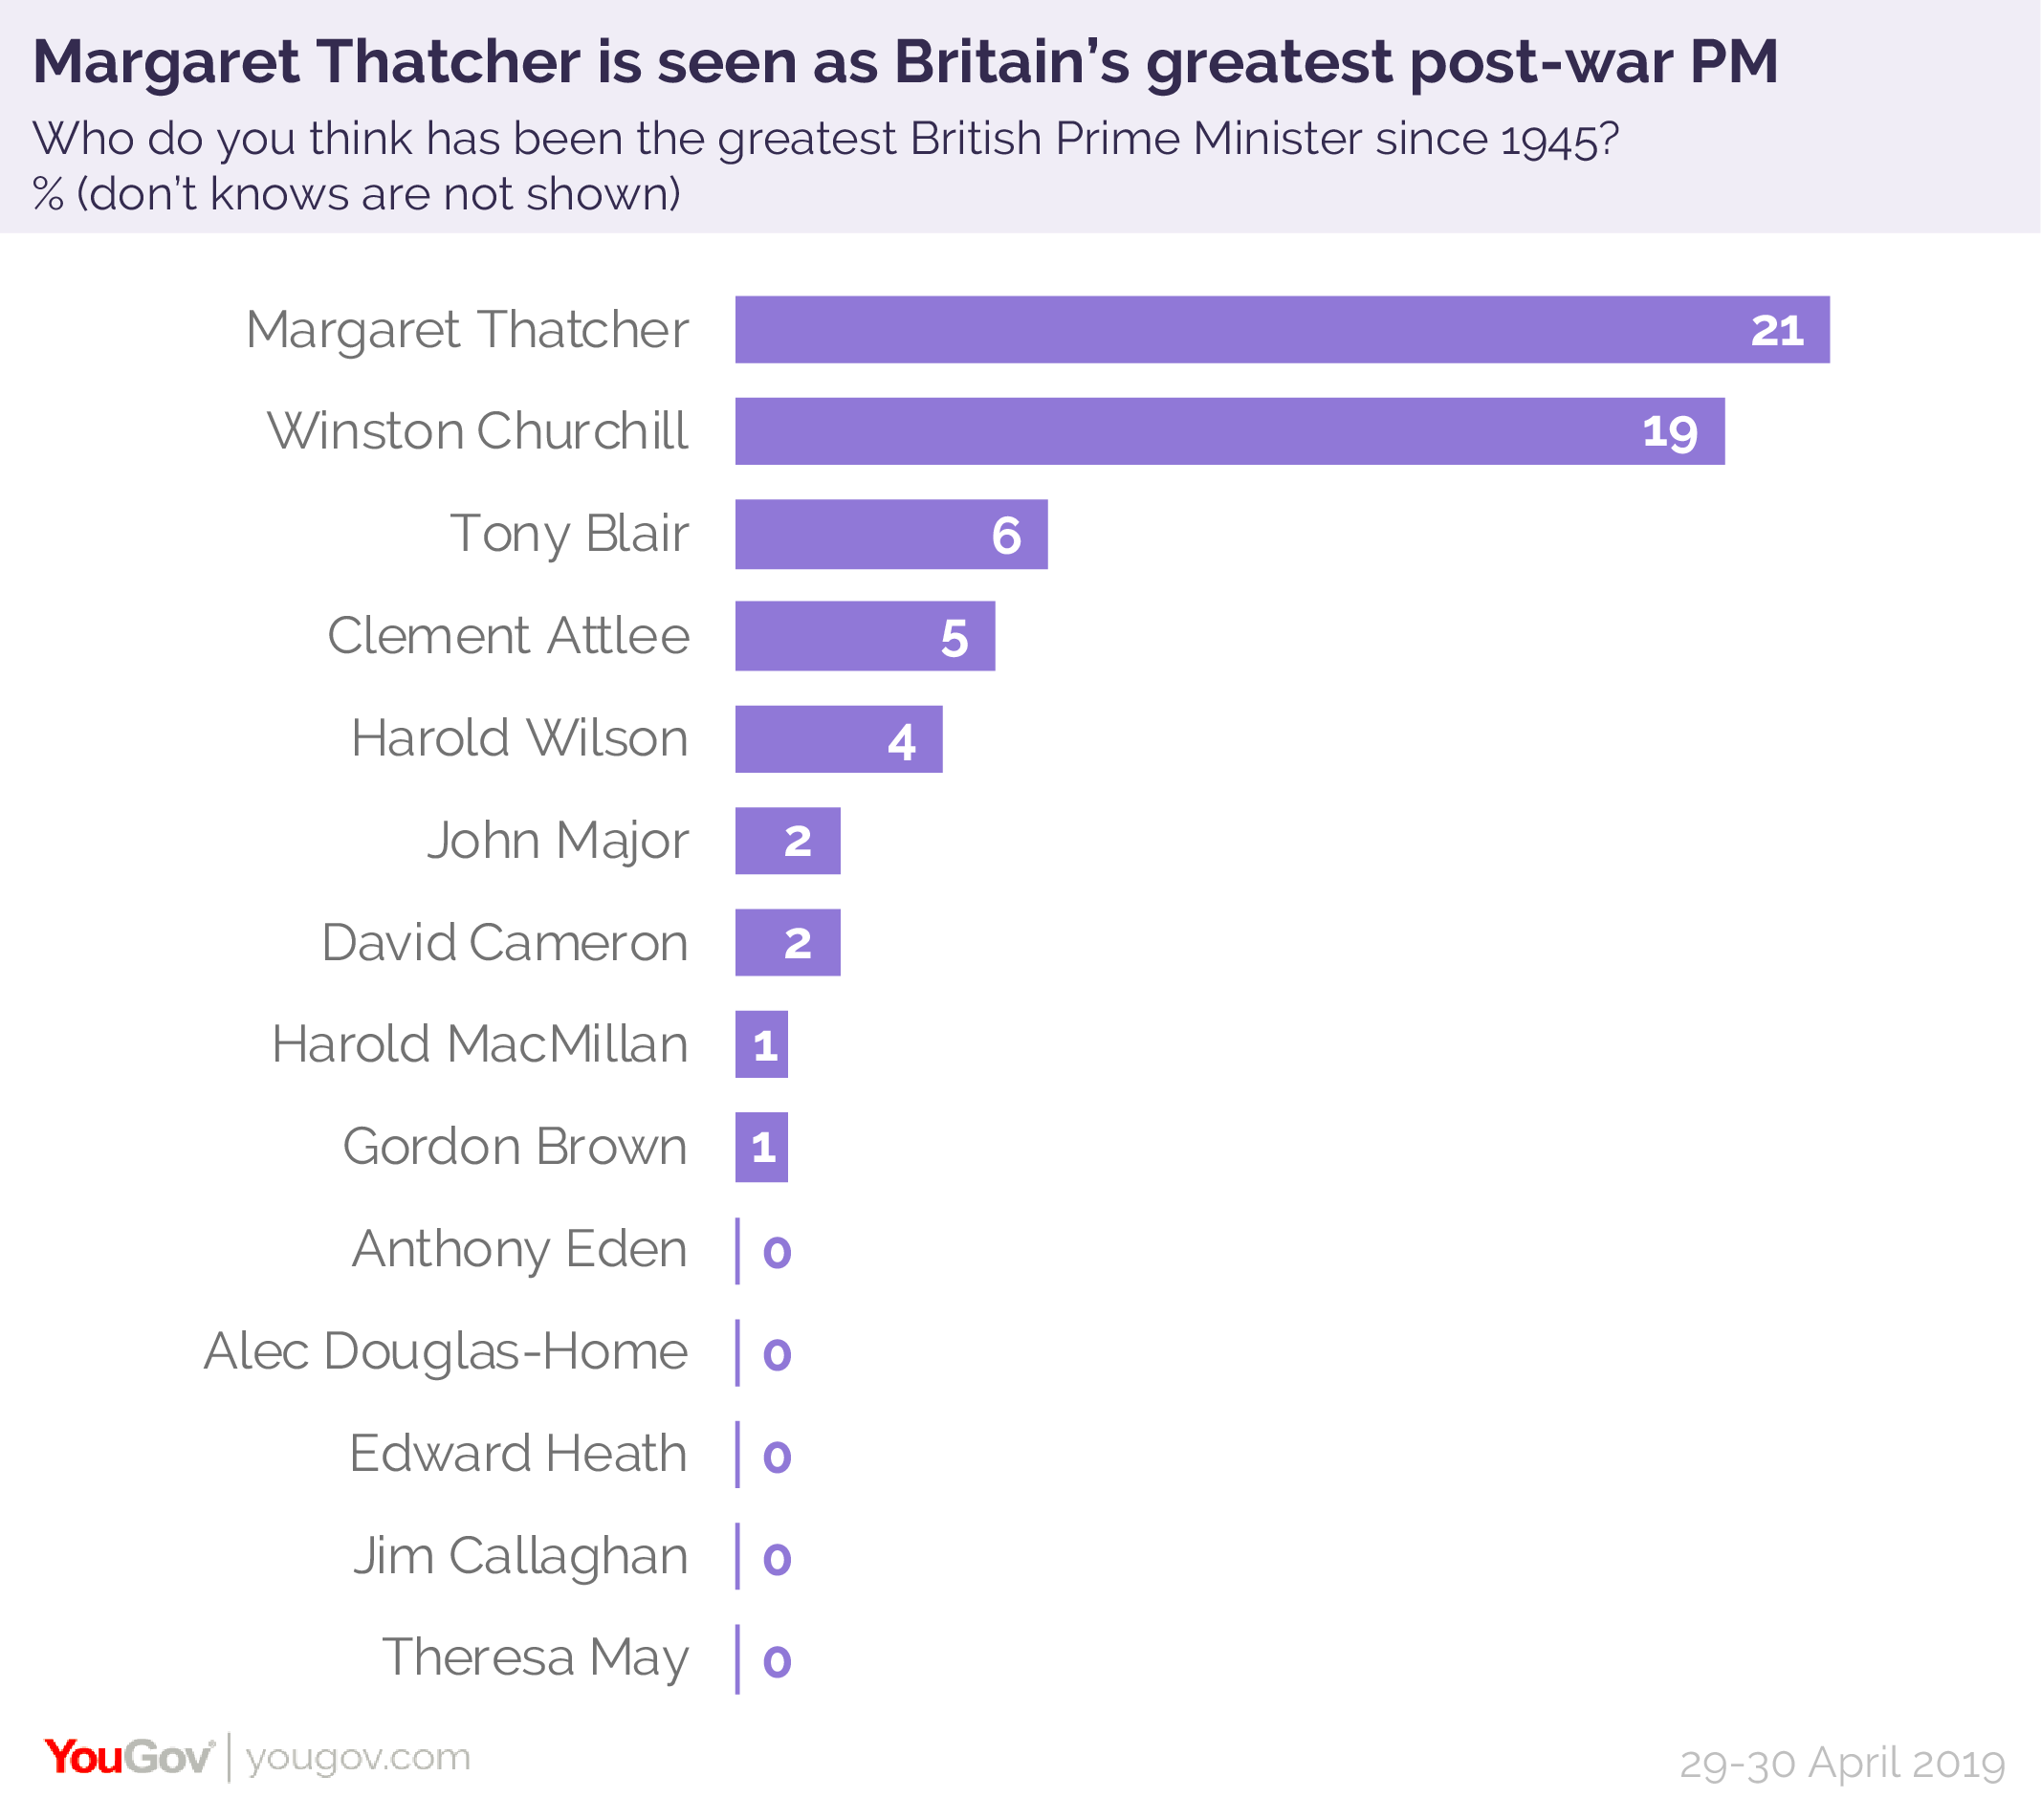 Thatcher%20greatest%20PMs-01.png